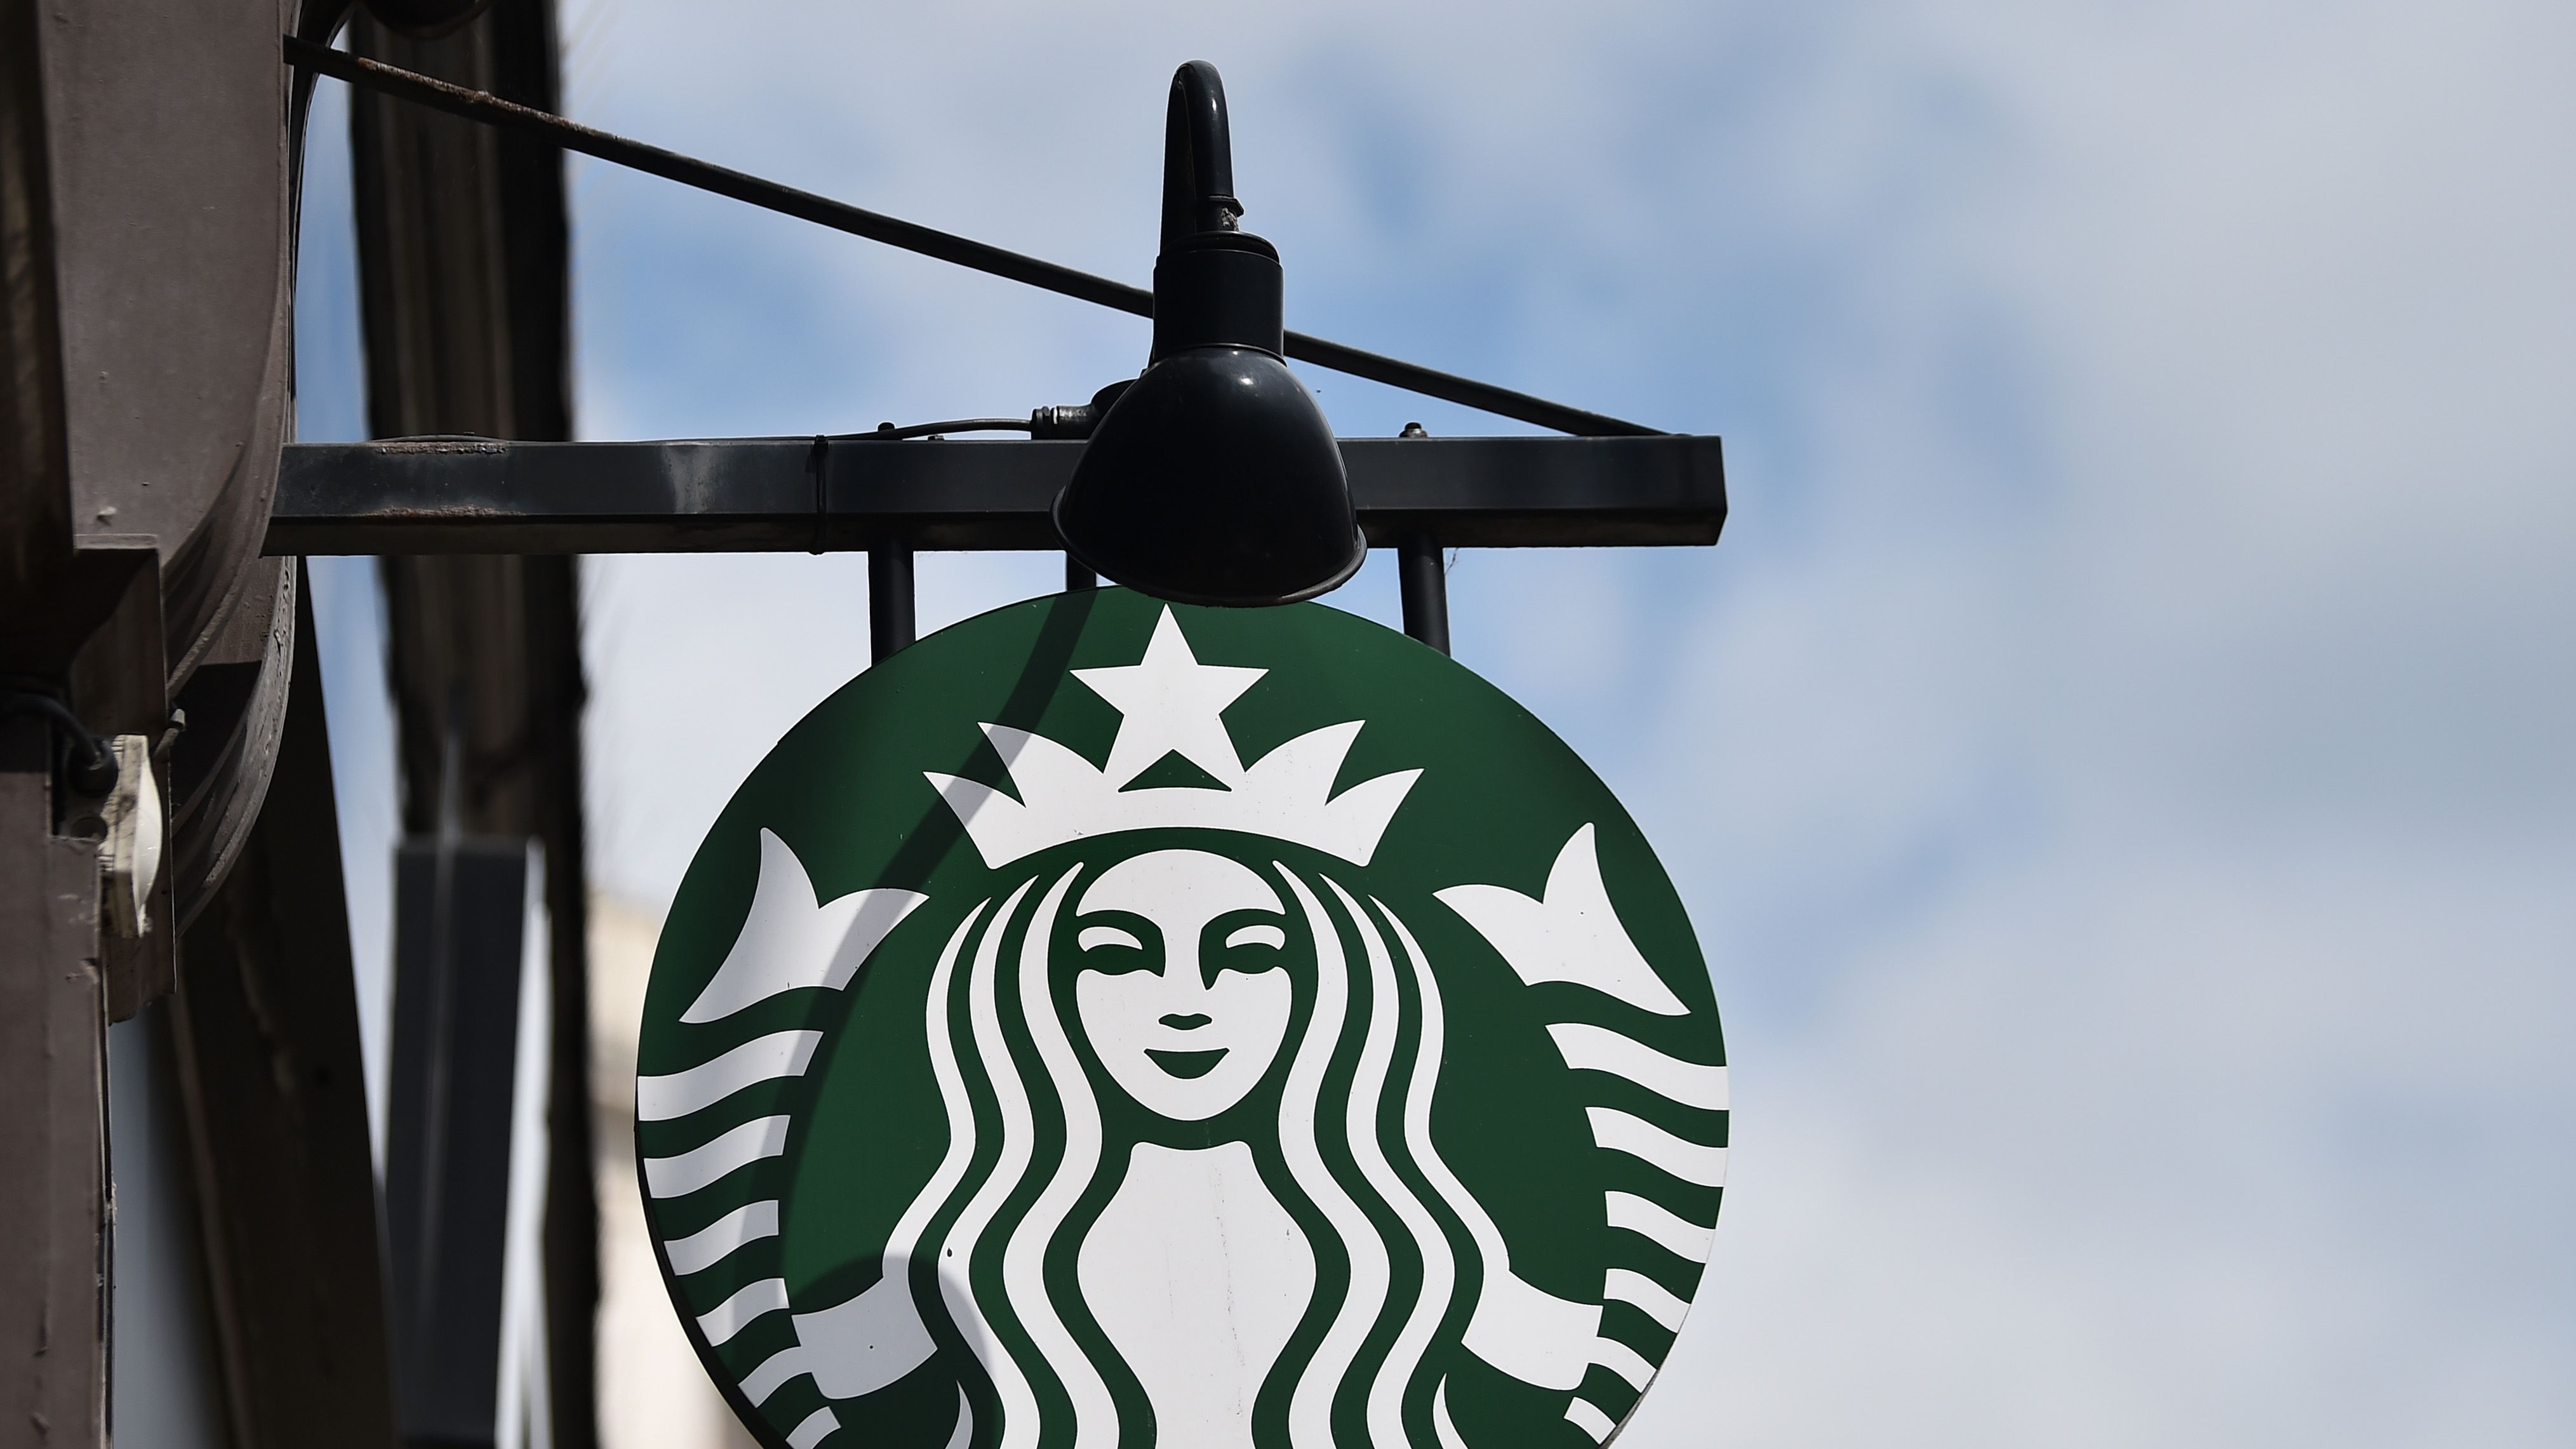 https://hips.hearstapps.com/hmg-prod/images/the-american-coffeehouse-company-starbucks-logo-is-news-photo-1695416695.jpg?crop=1xw:0.84678xh;center,top